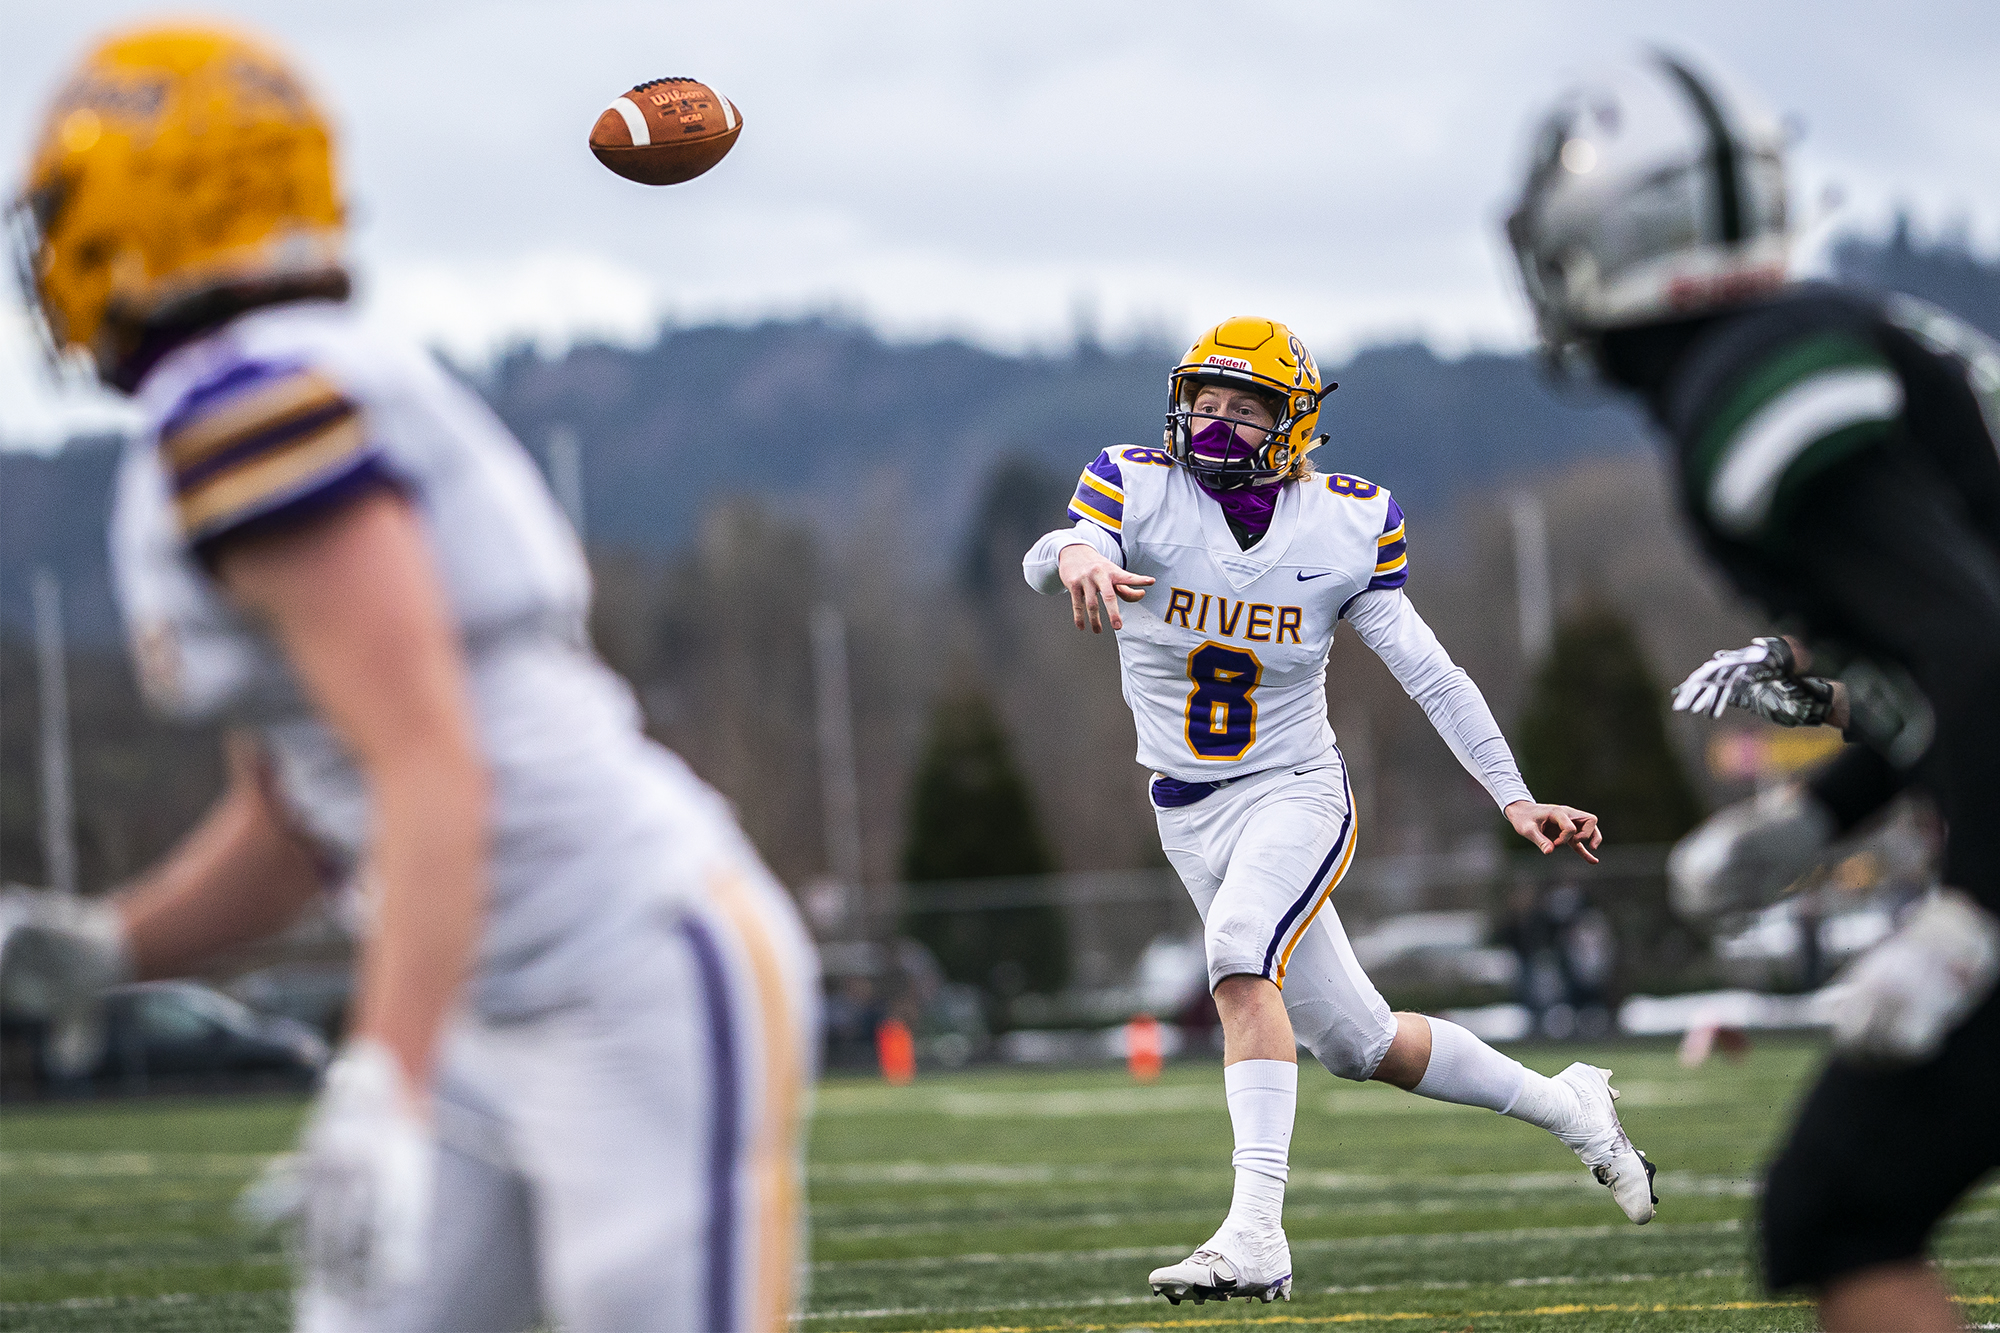 Columbia River's Mason Priddy completes a pass fora. Touchdown against Woodland during a season opener game at Woodland High School on Saturday night, Feb. 20, 2021.